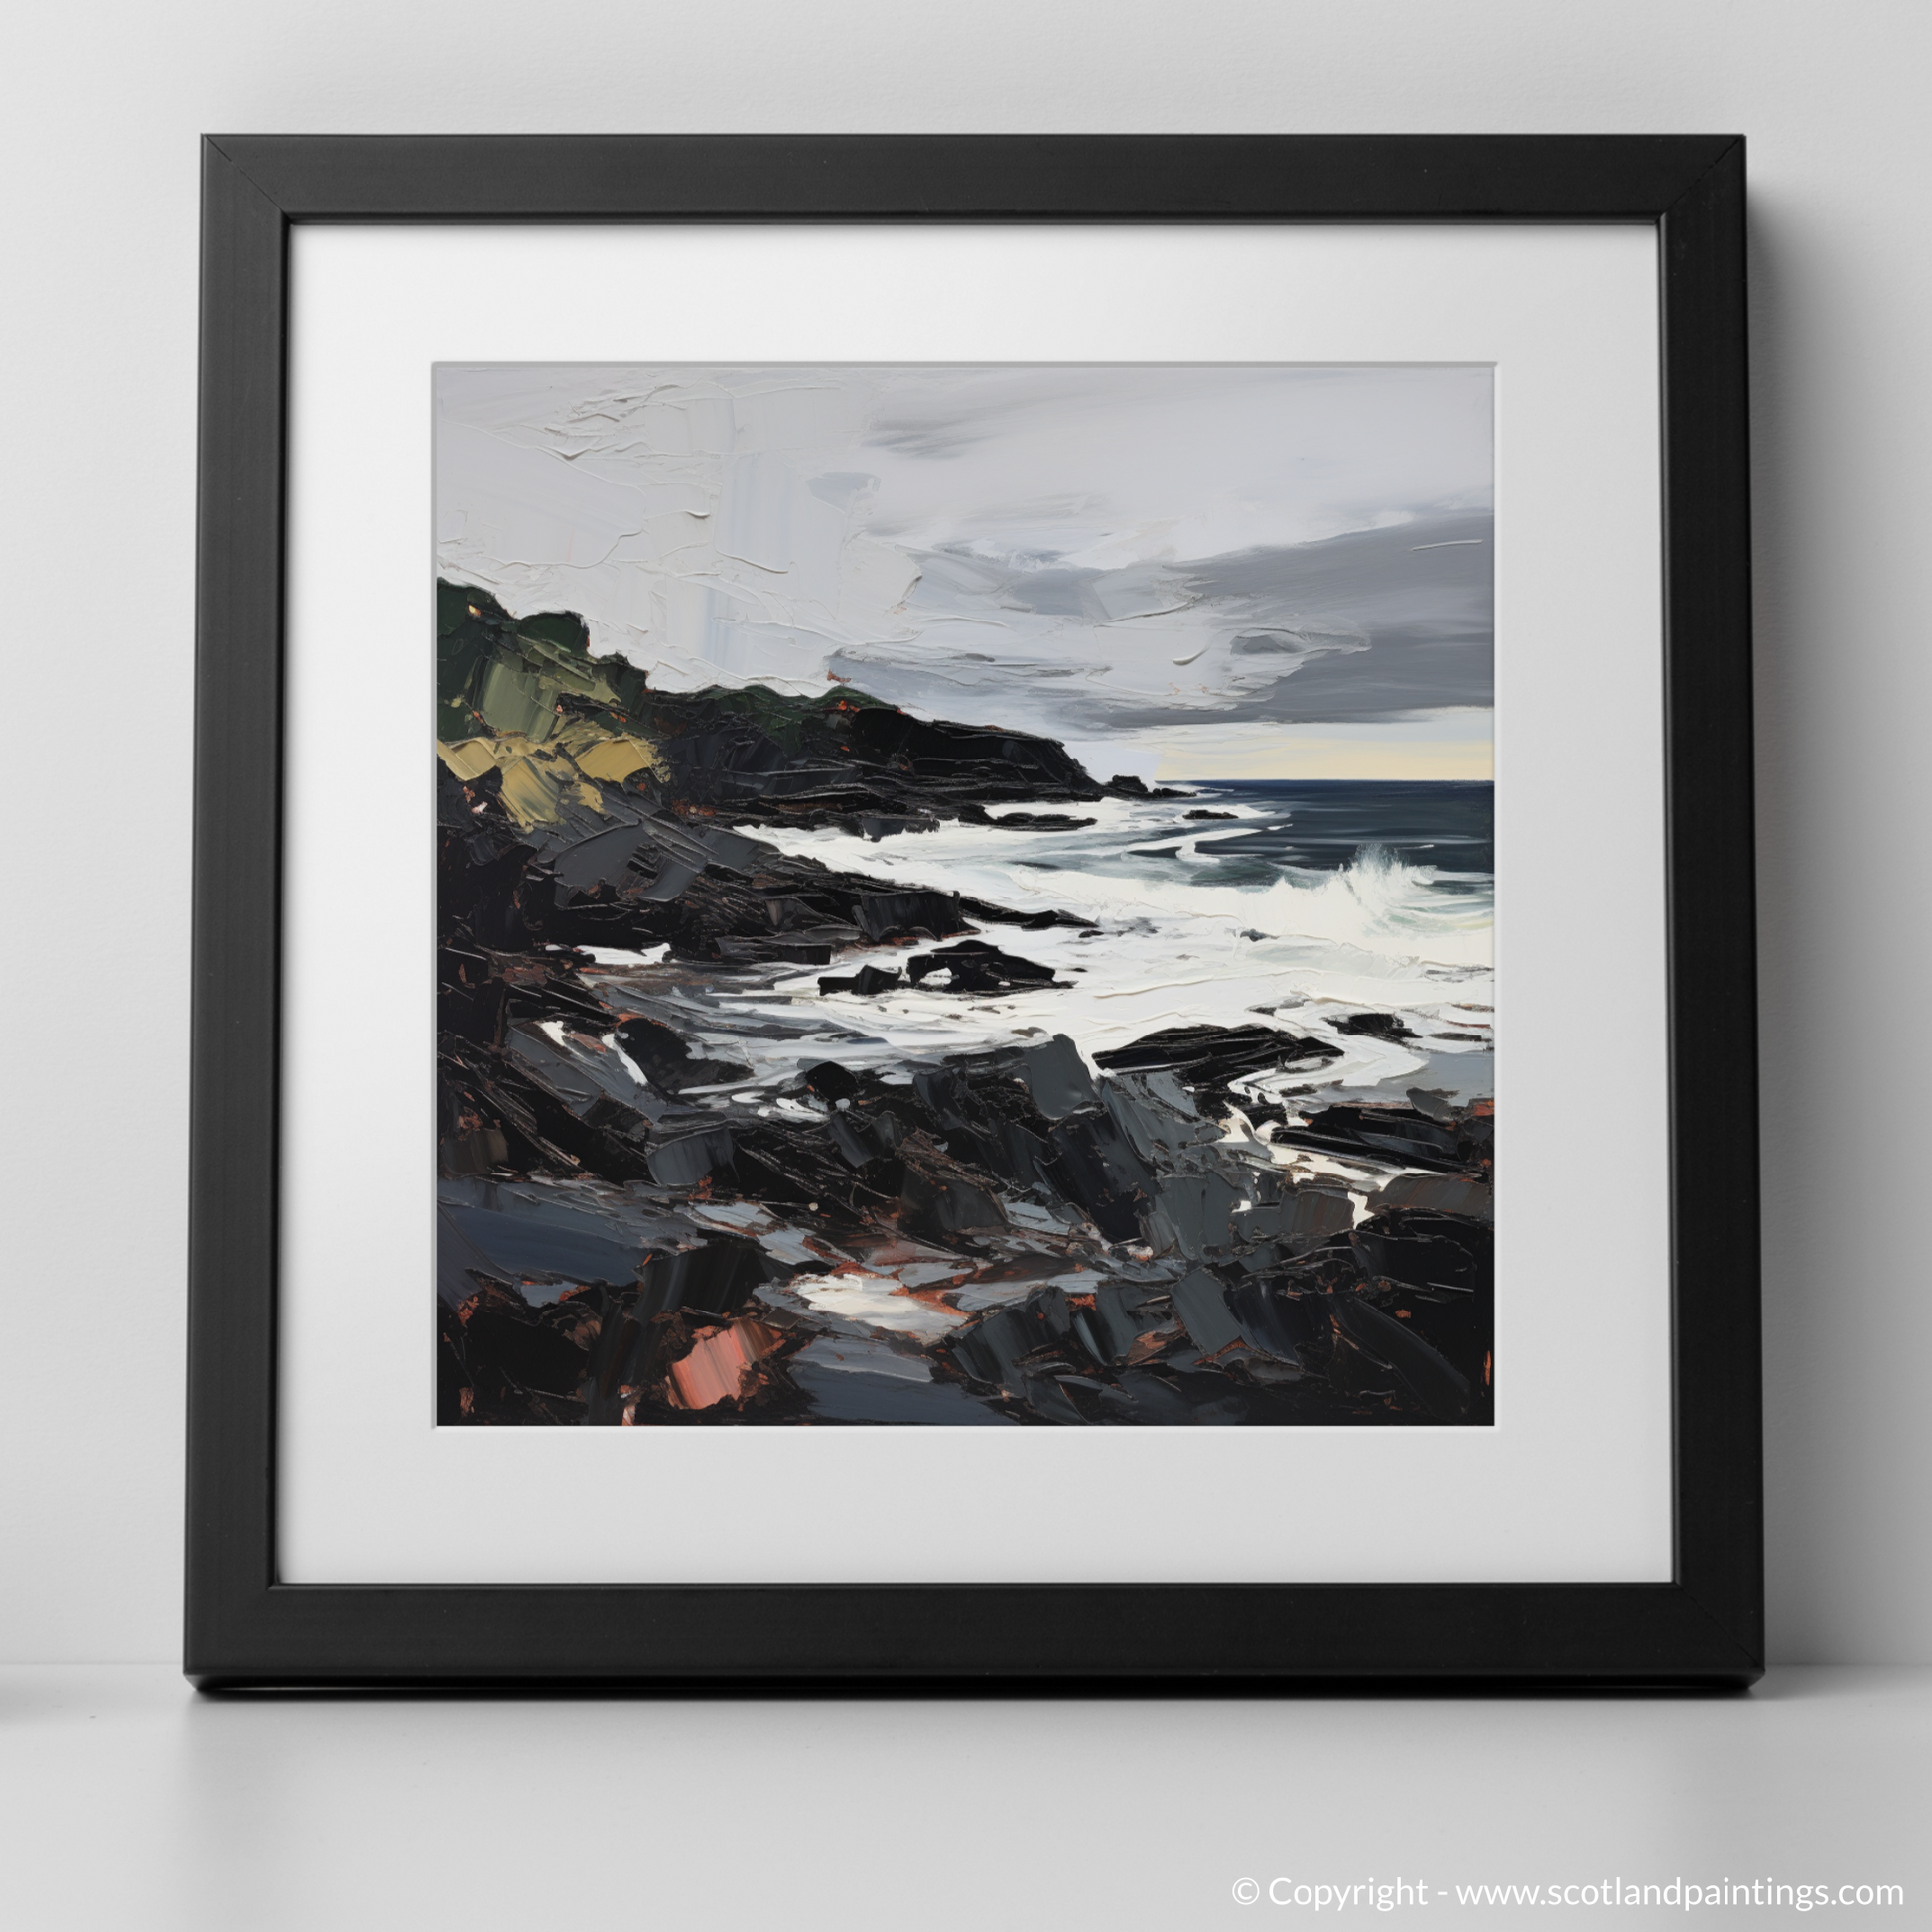 Art Print of Coldingham Bay with a stormy sky with a black frame